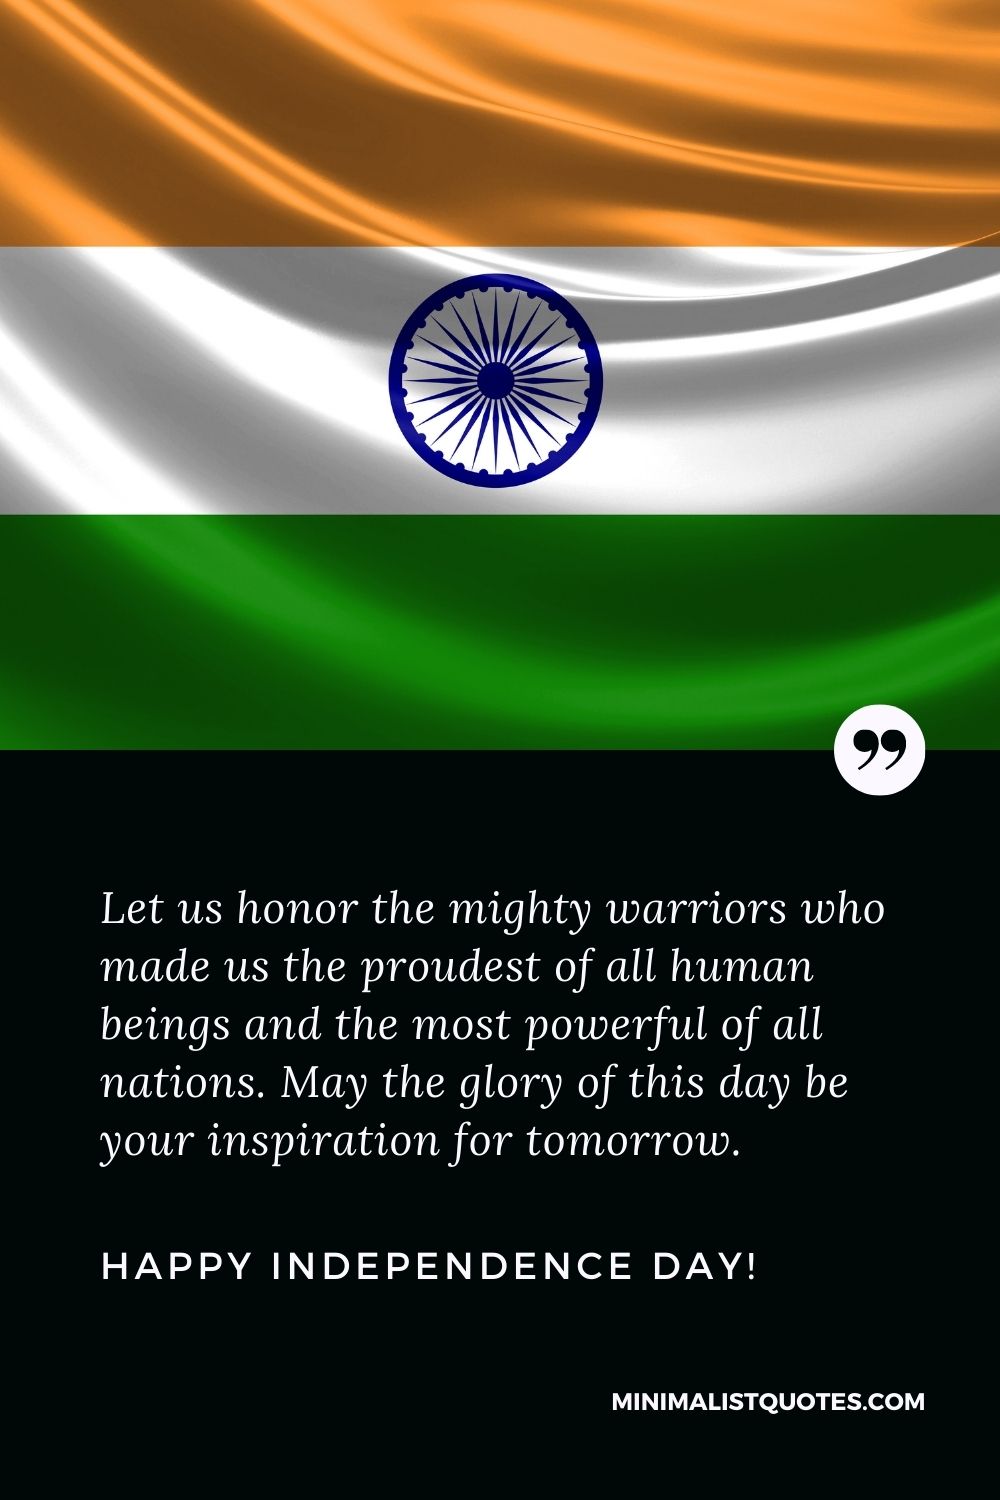 Independence Day (India) Wishes, Quotes & Messages | Minimalist Quotes